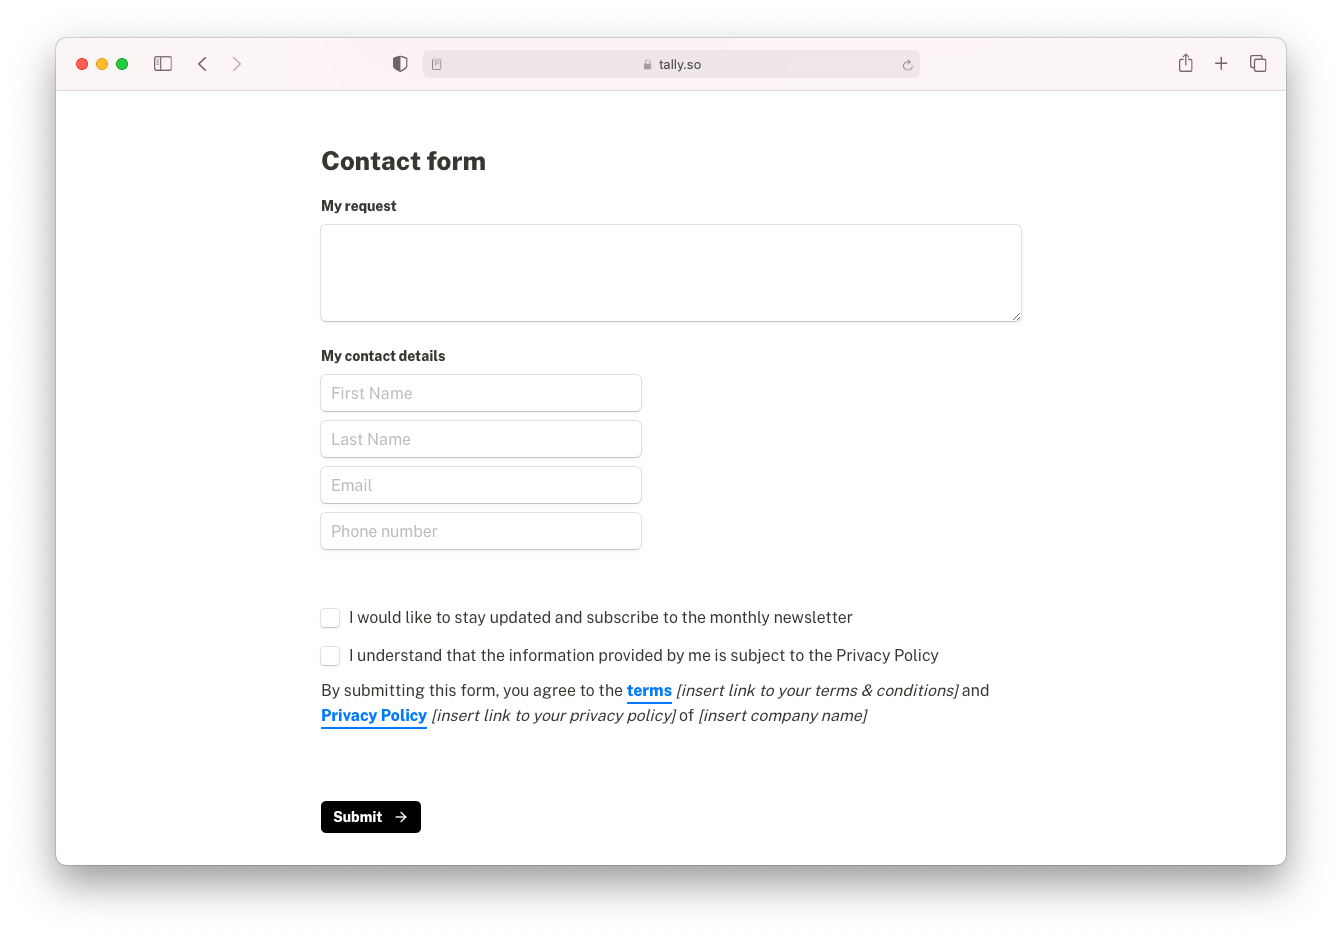 GDPR compliant contact form